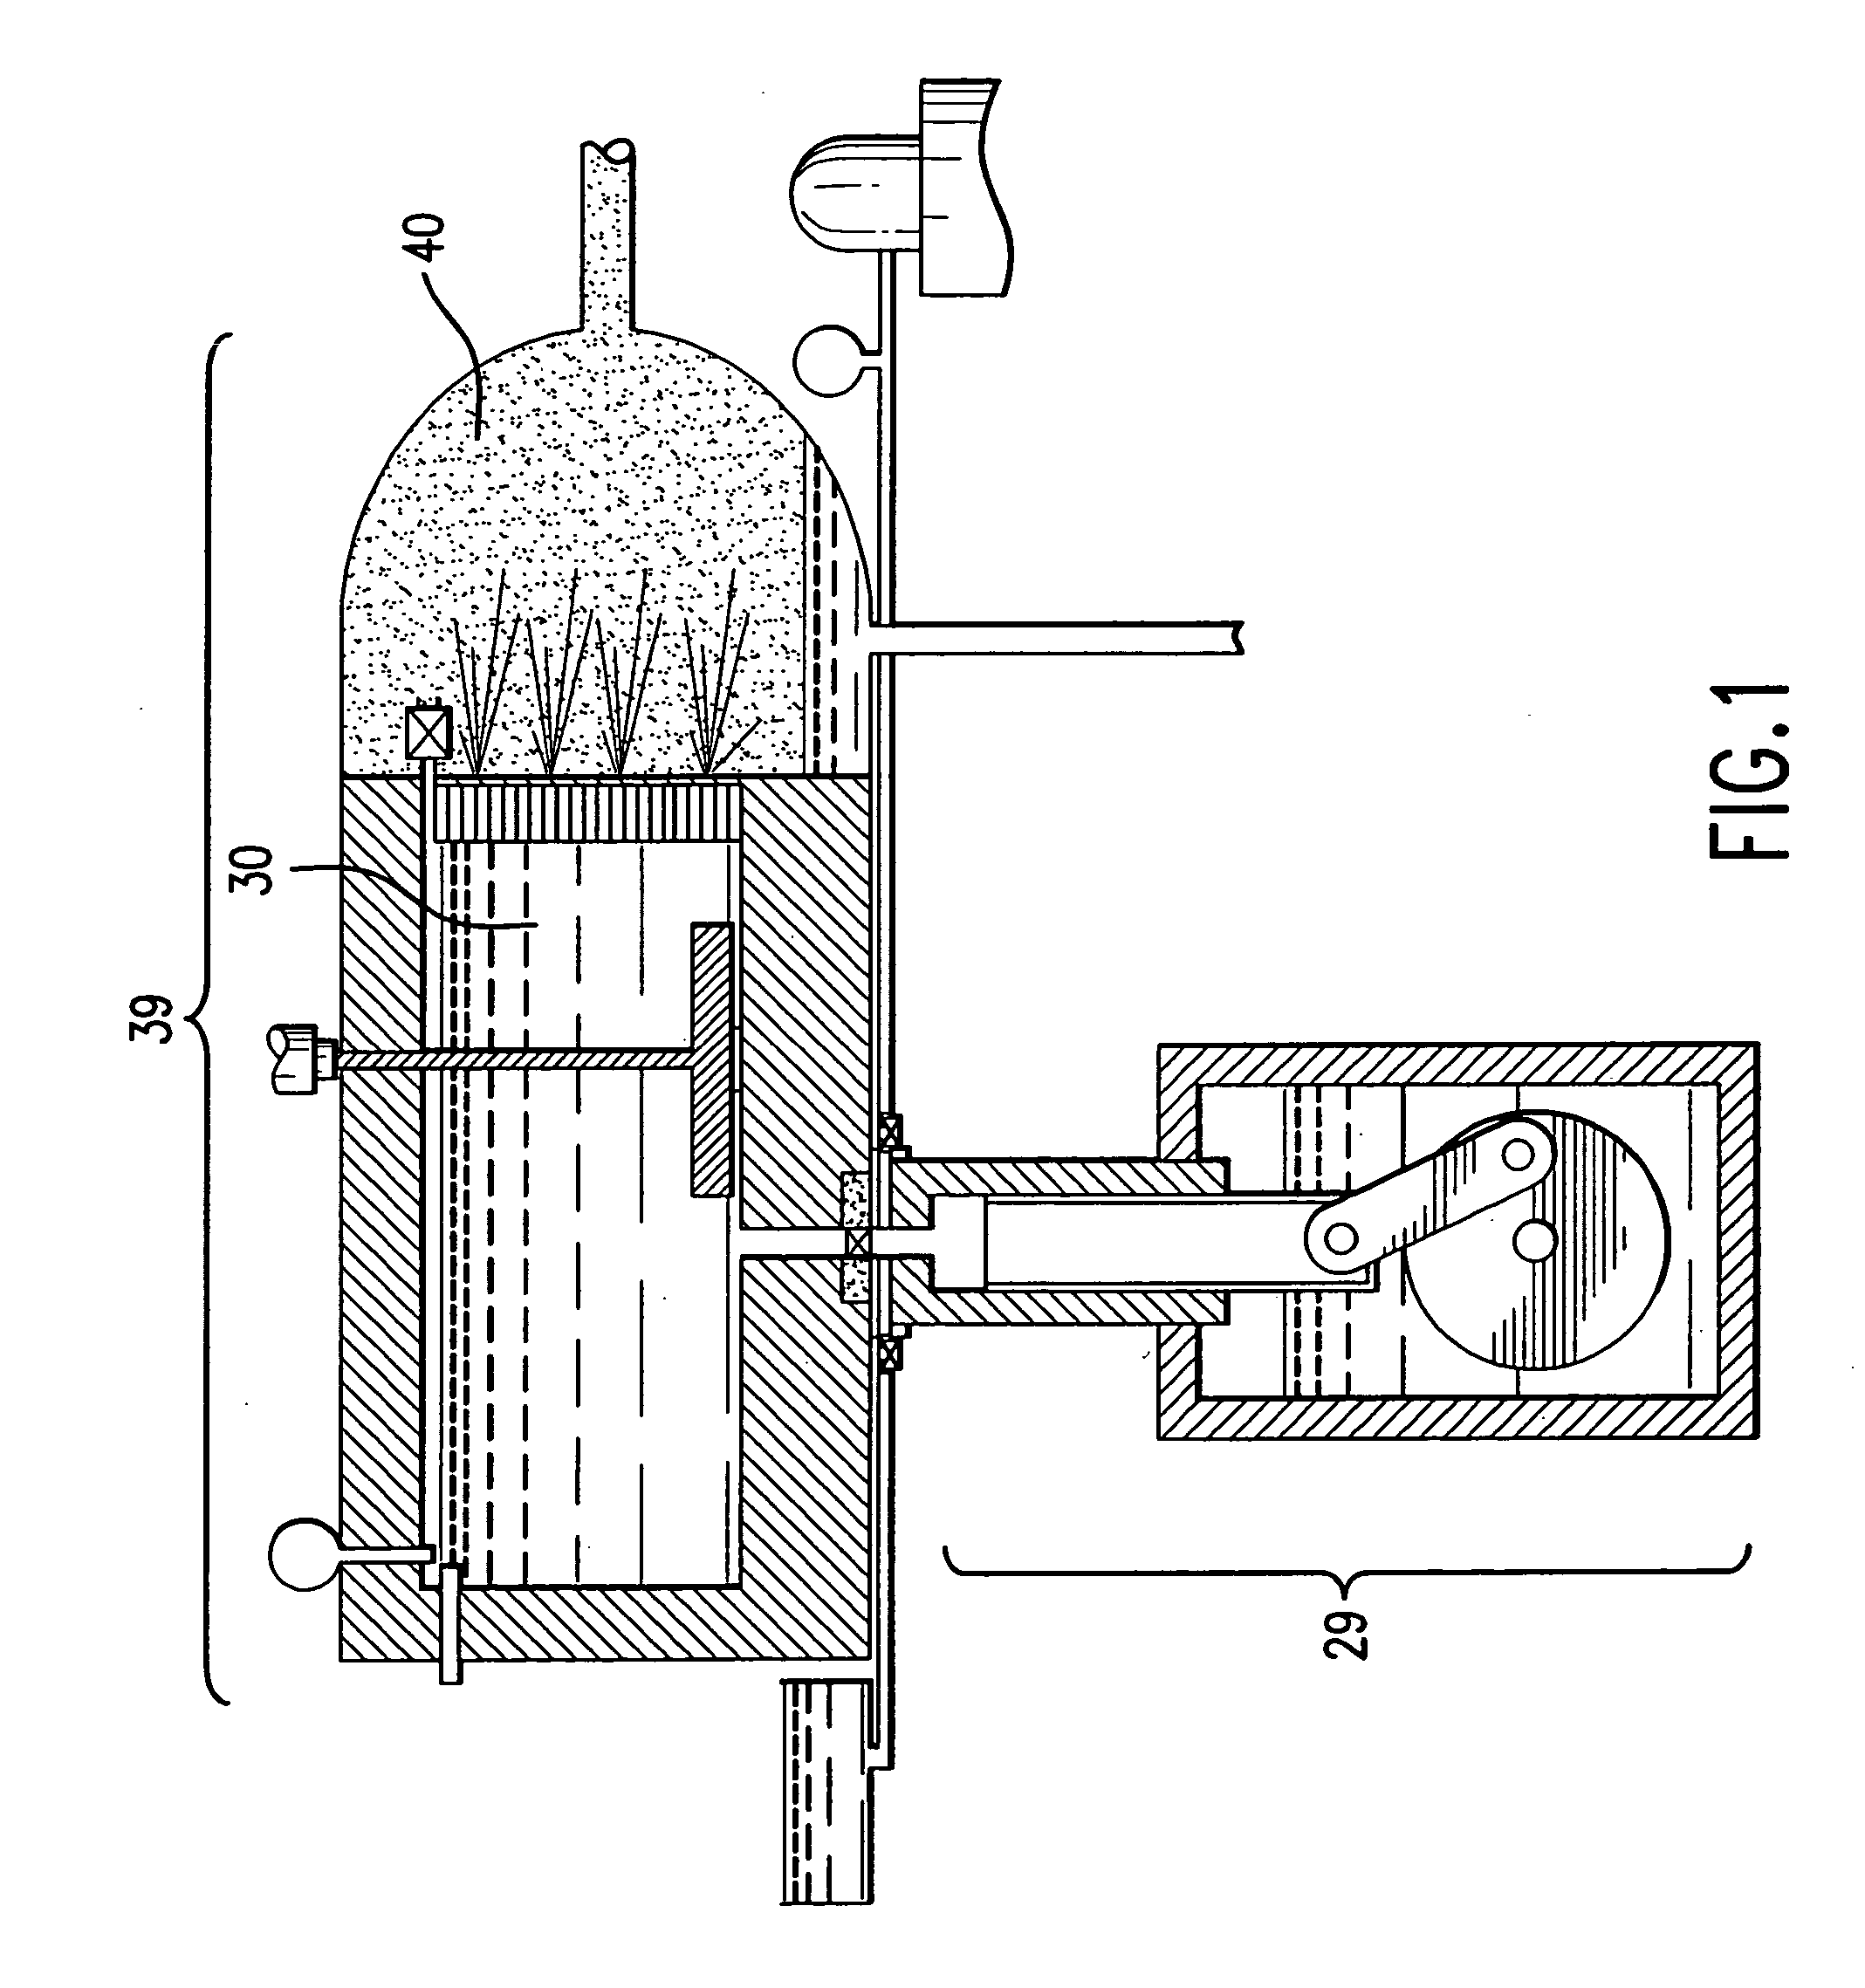 Method and device for generating mists and medical uses thereof